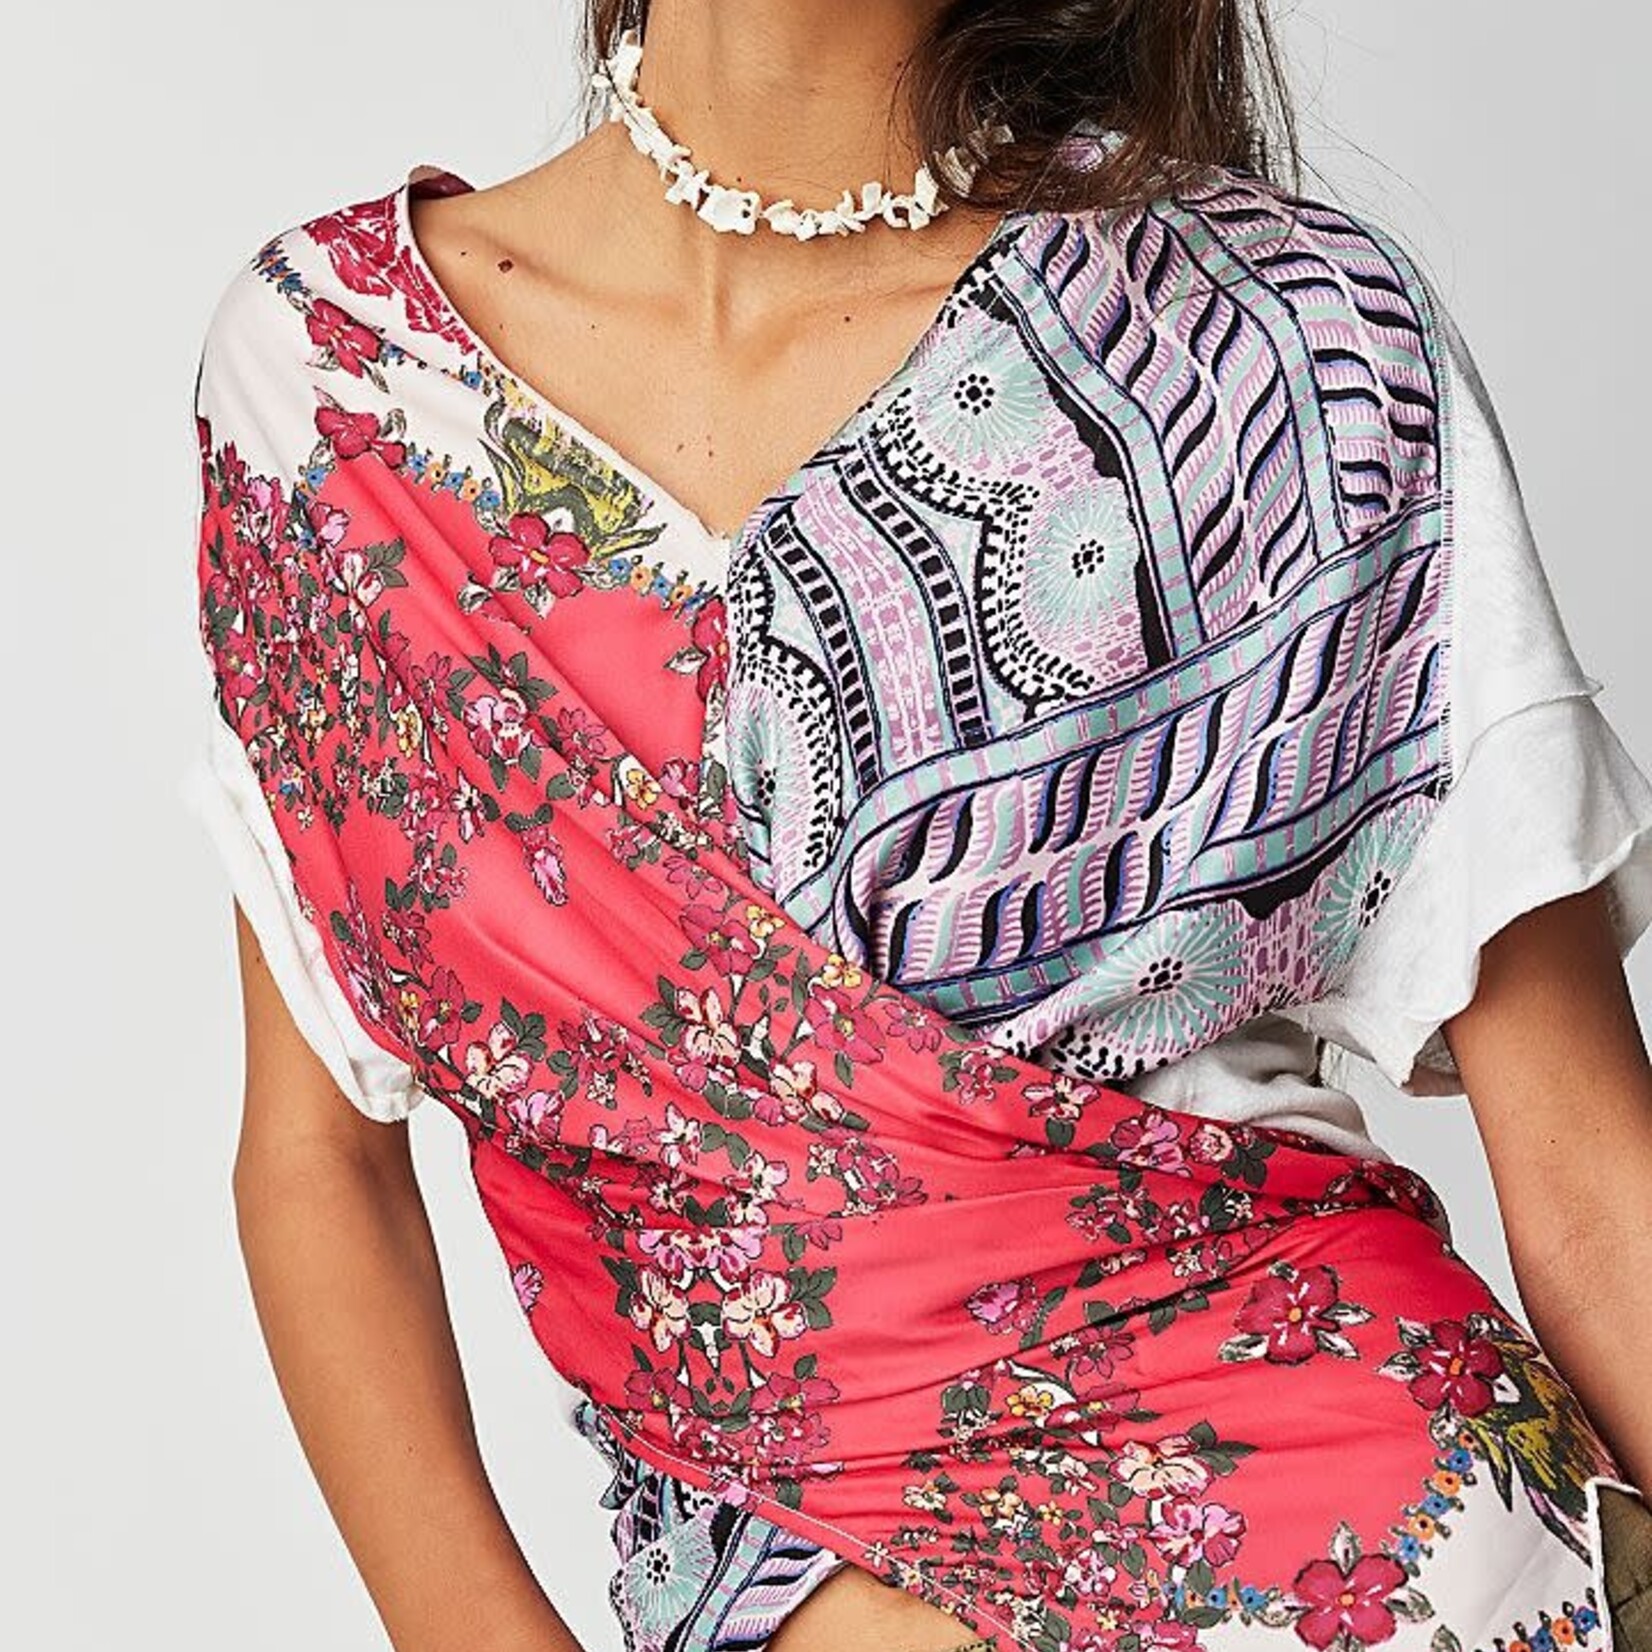 Free People Pick Your Scarf Maxi Tee